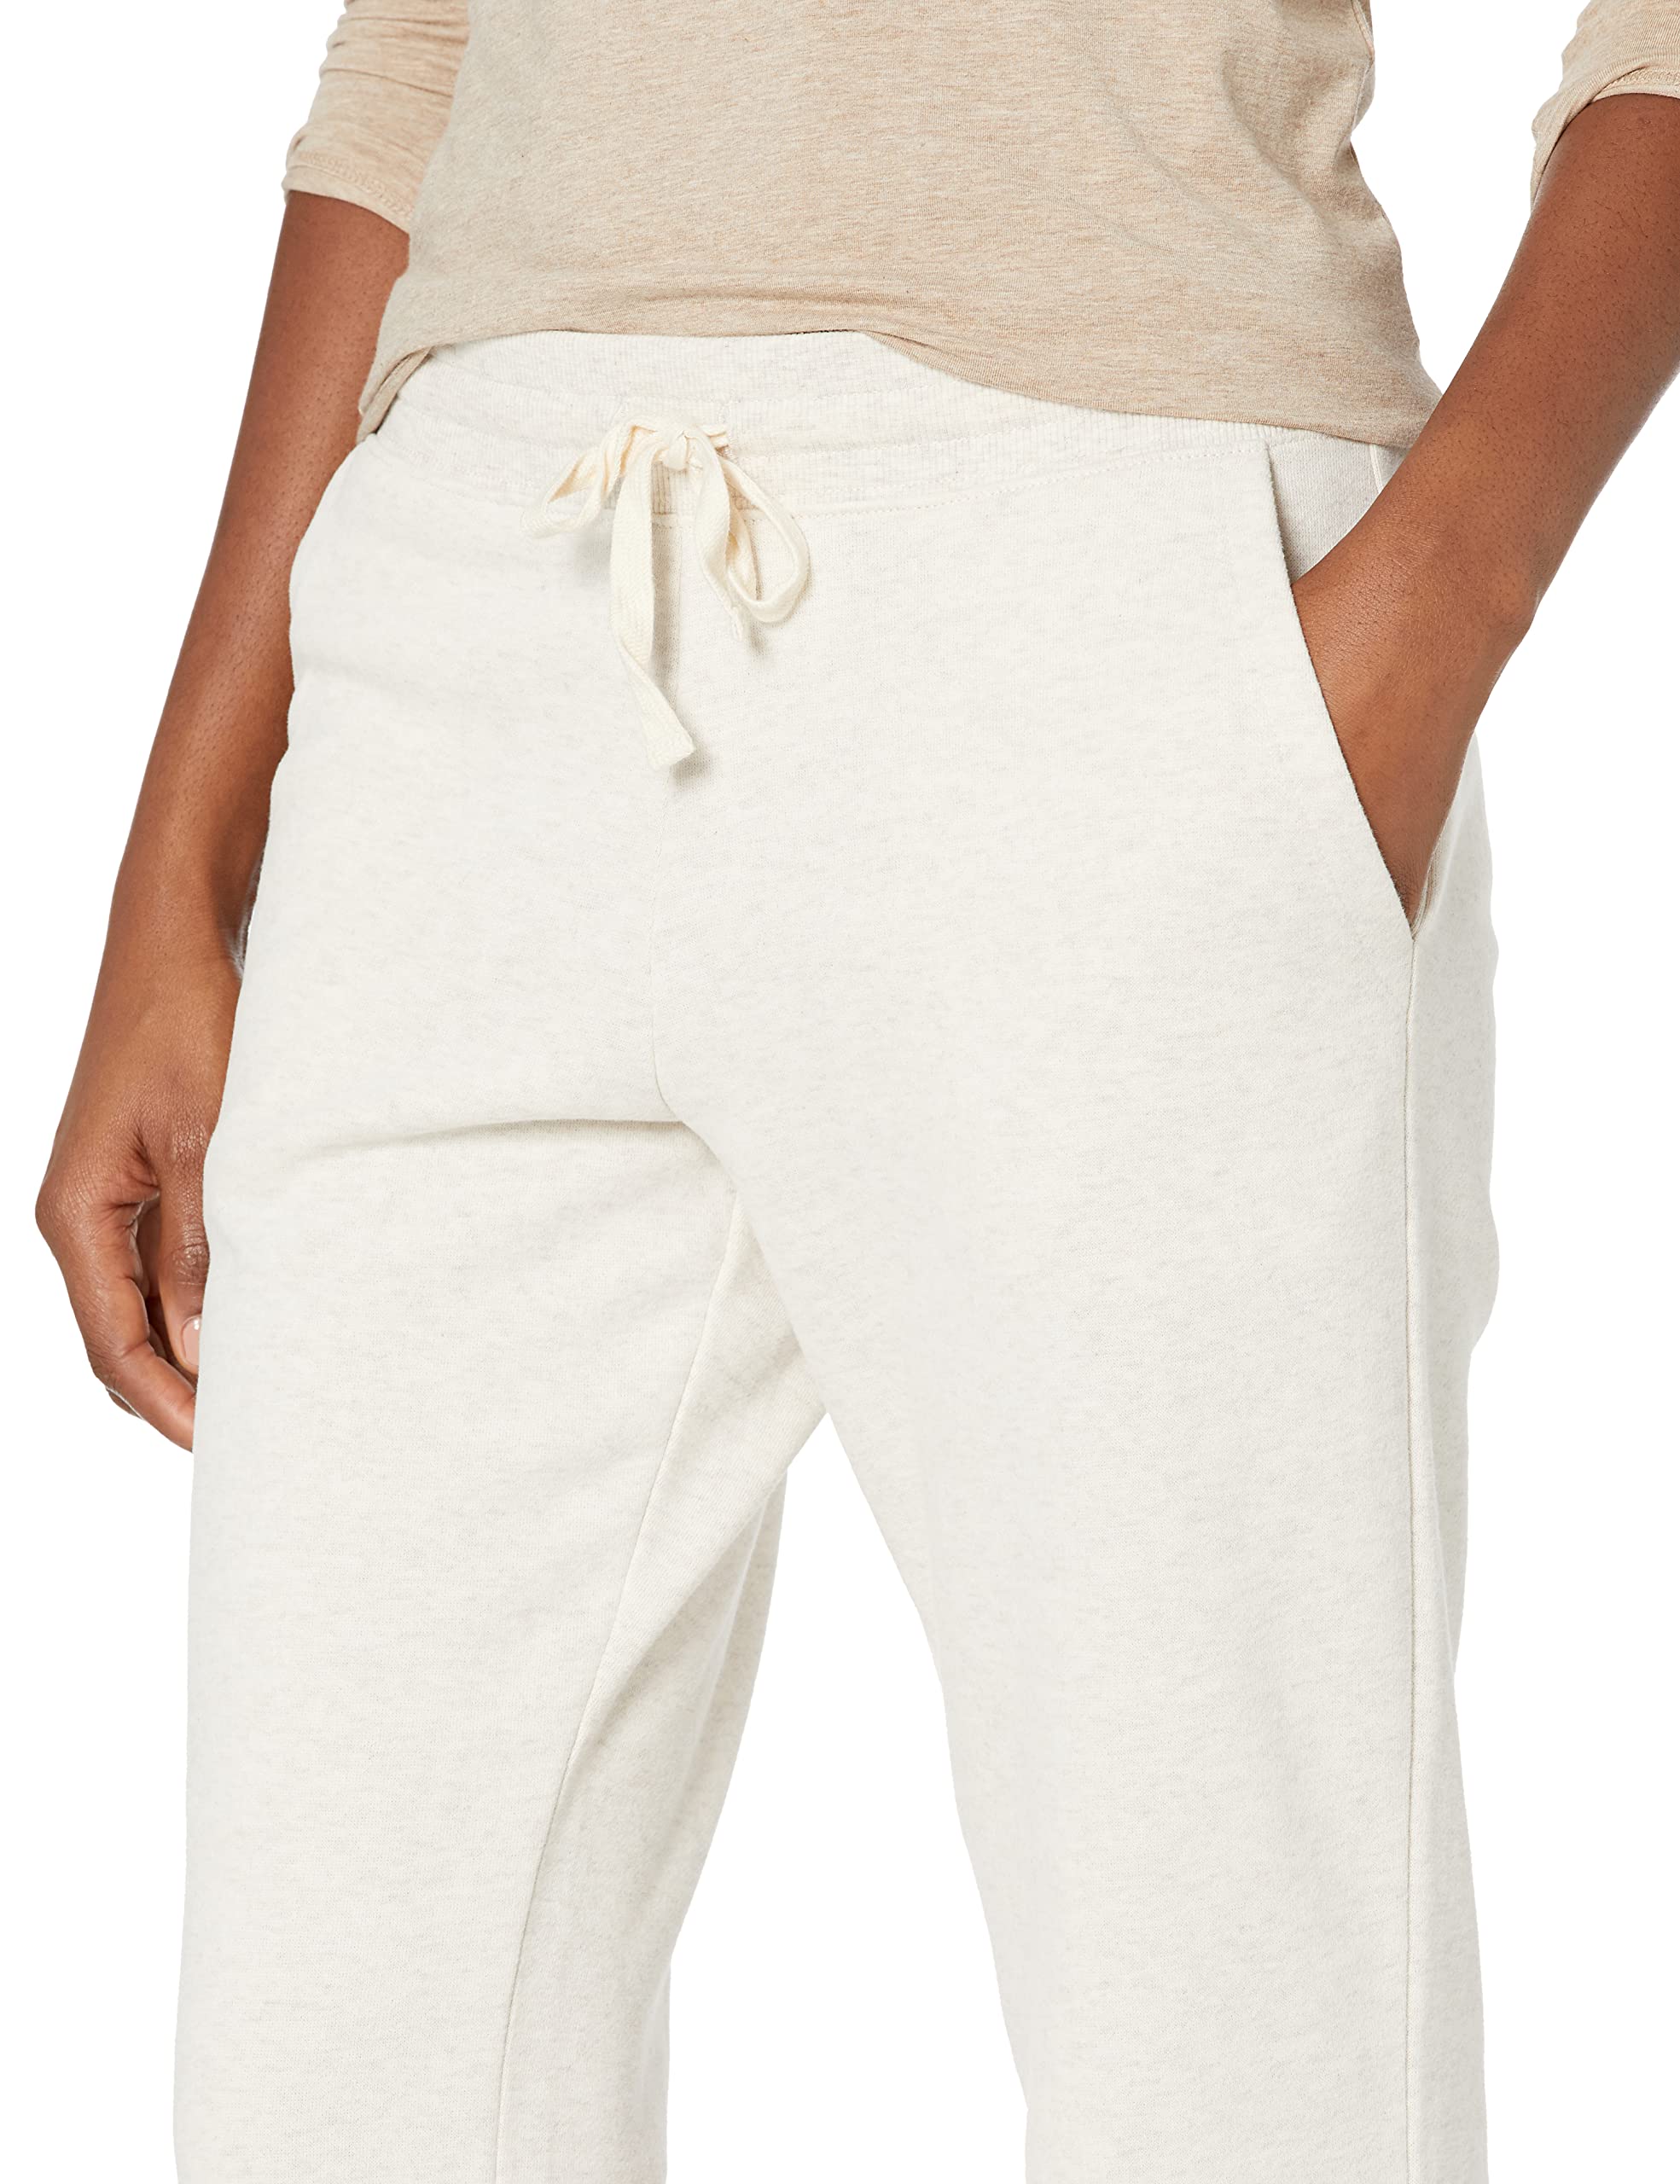 Amazon Essentials Women's French Terry Fleece Sweatpant (Available in Plus Size)